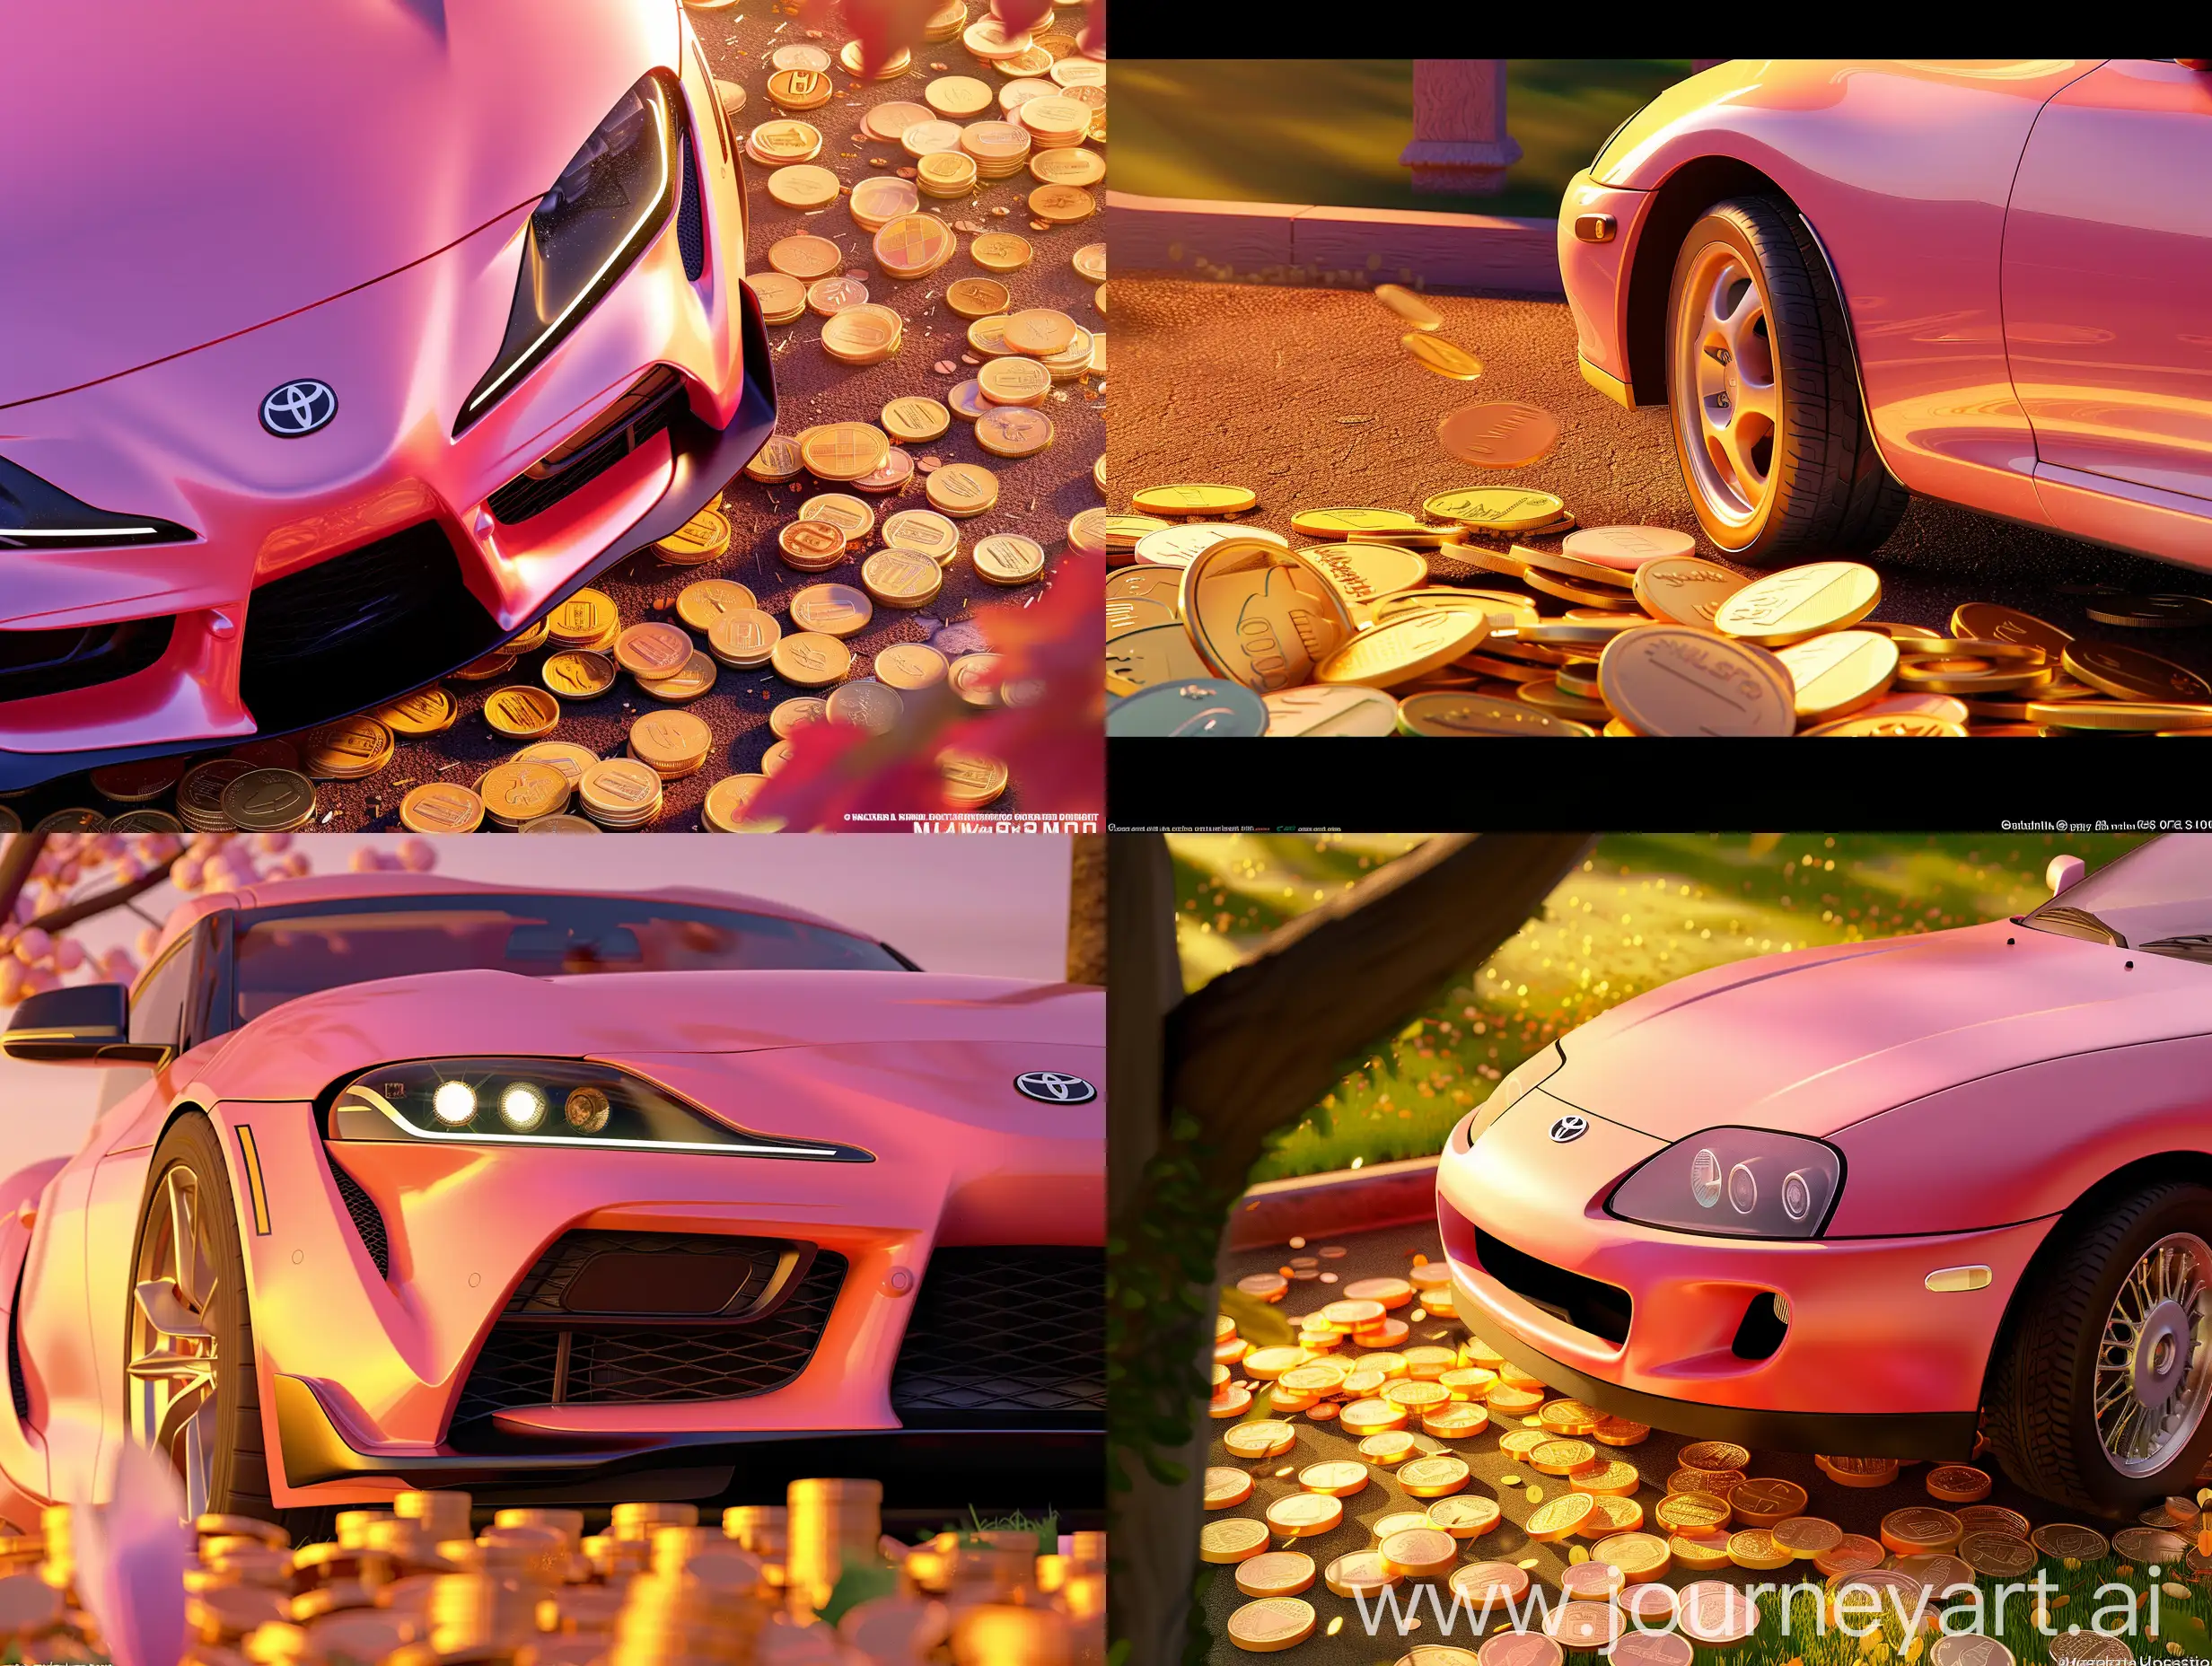 UltraRealistic-Aerial-View-of-Supra-MK4-amidst-Gleaming-Gold-Coins